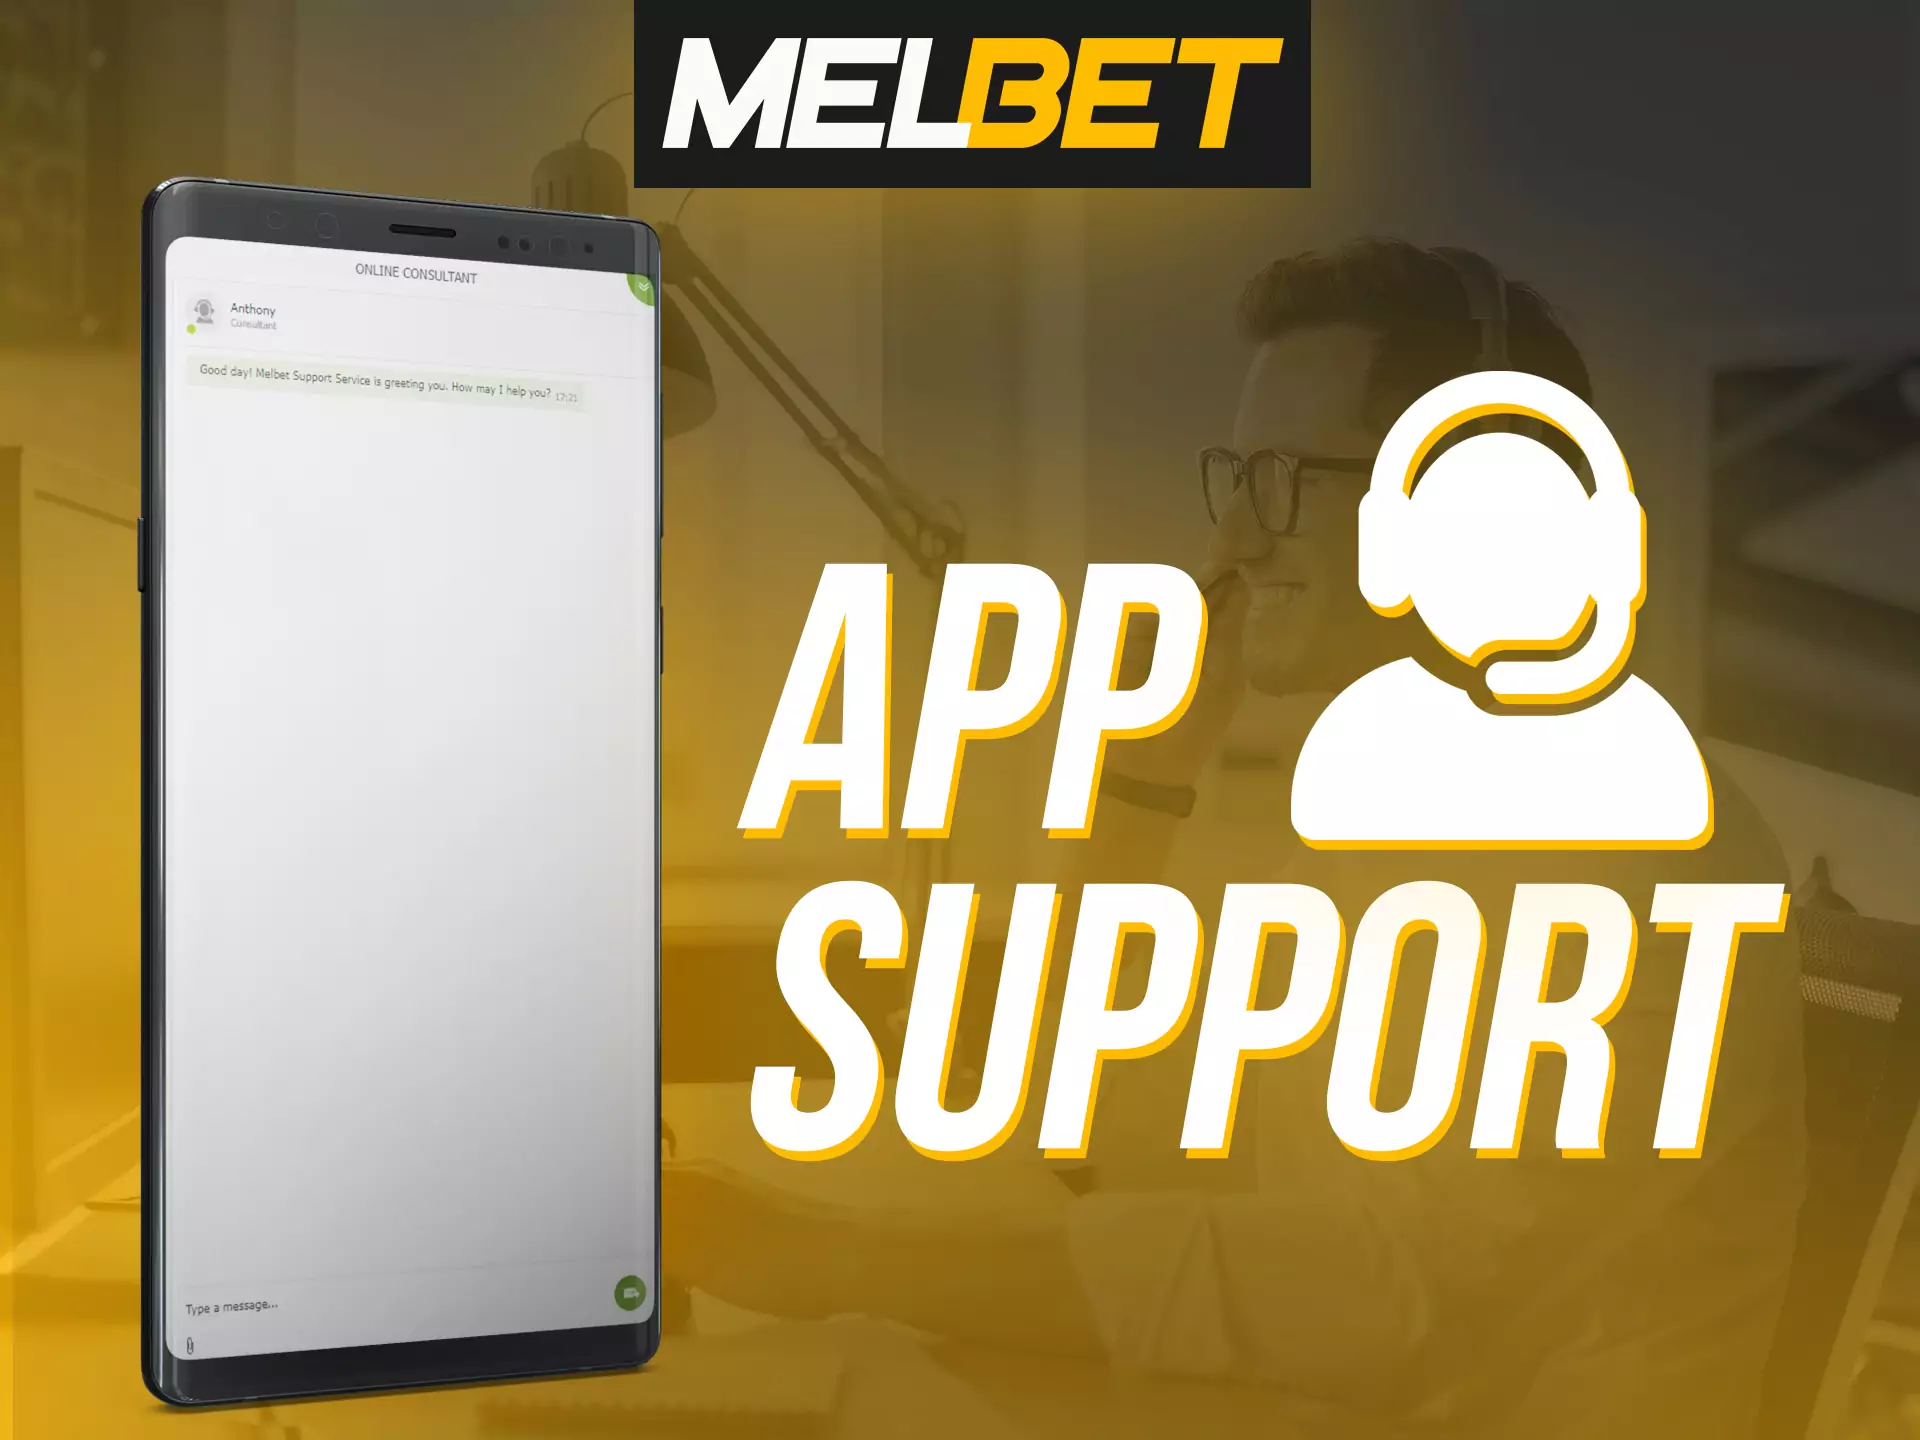 In the Melbet app you can always count on support at any time.